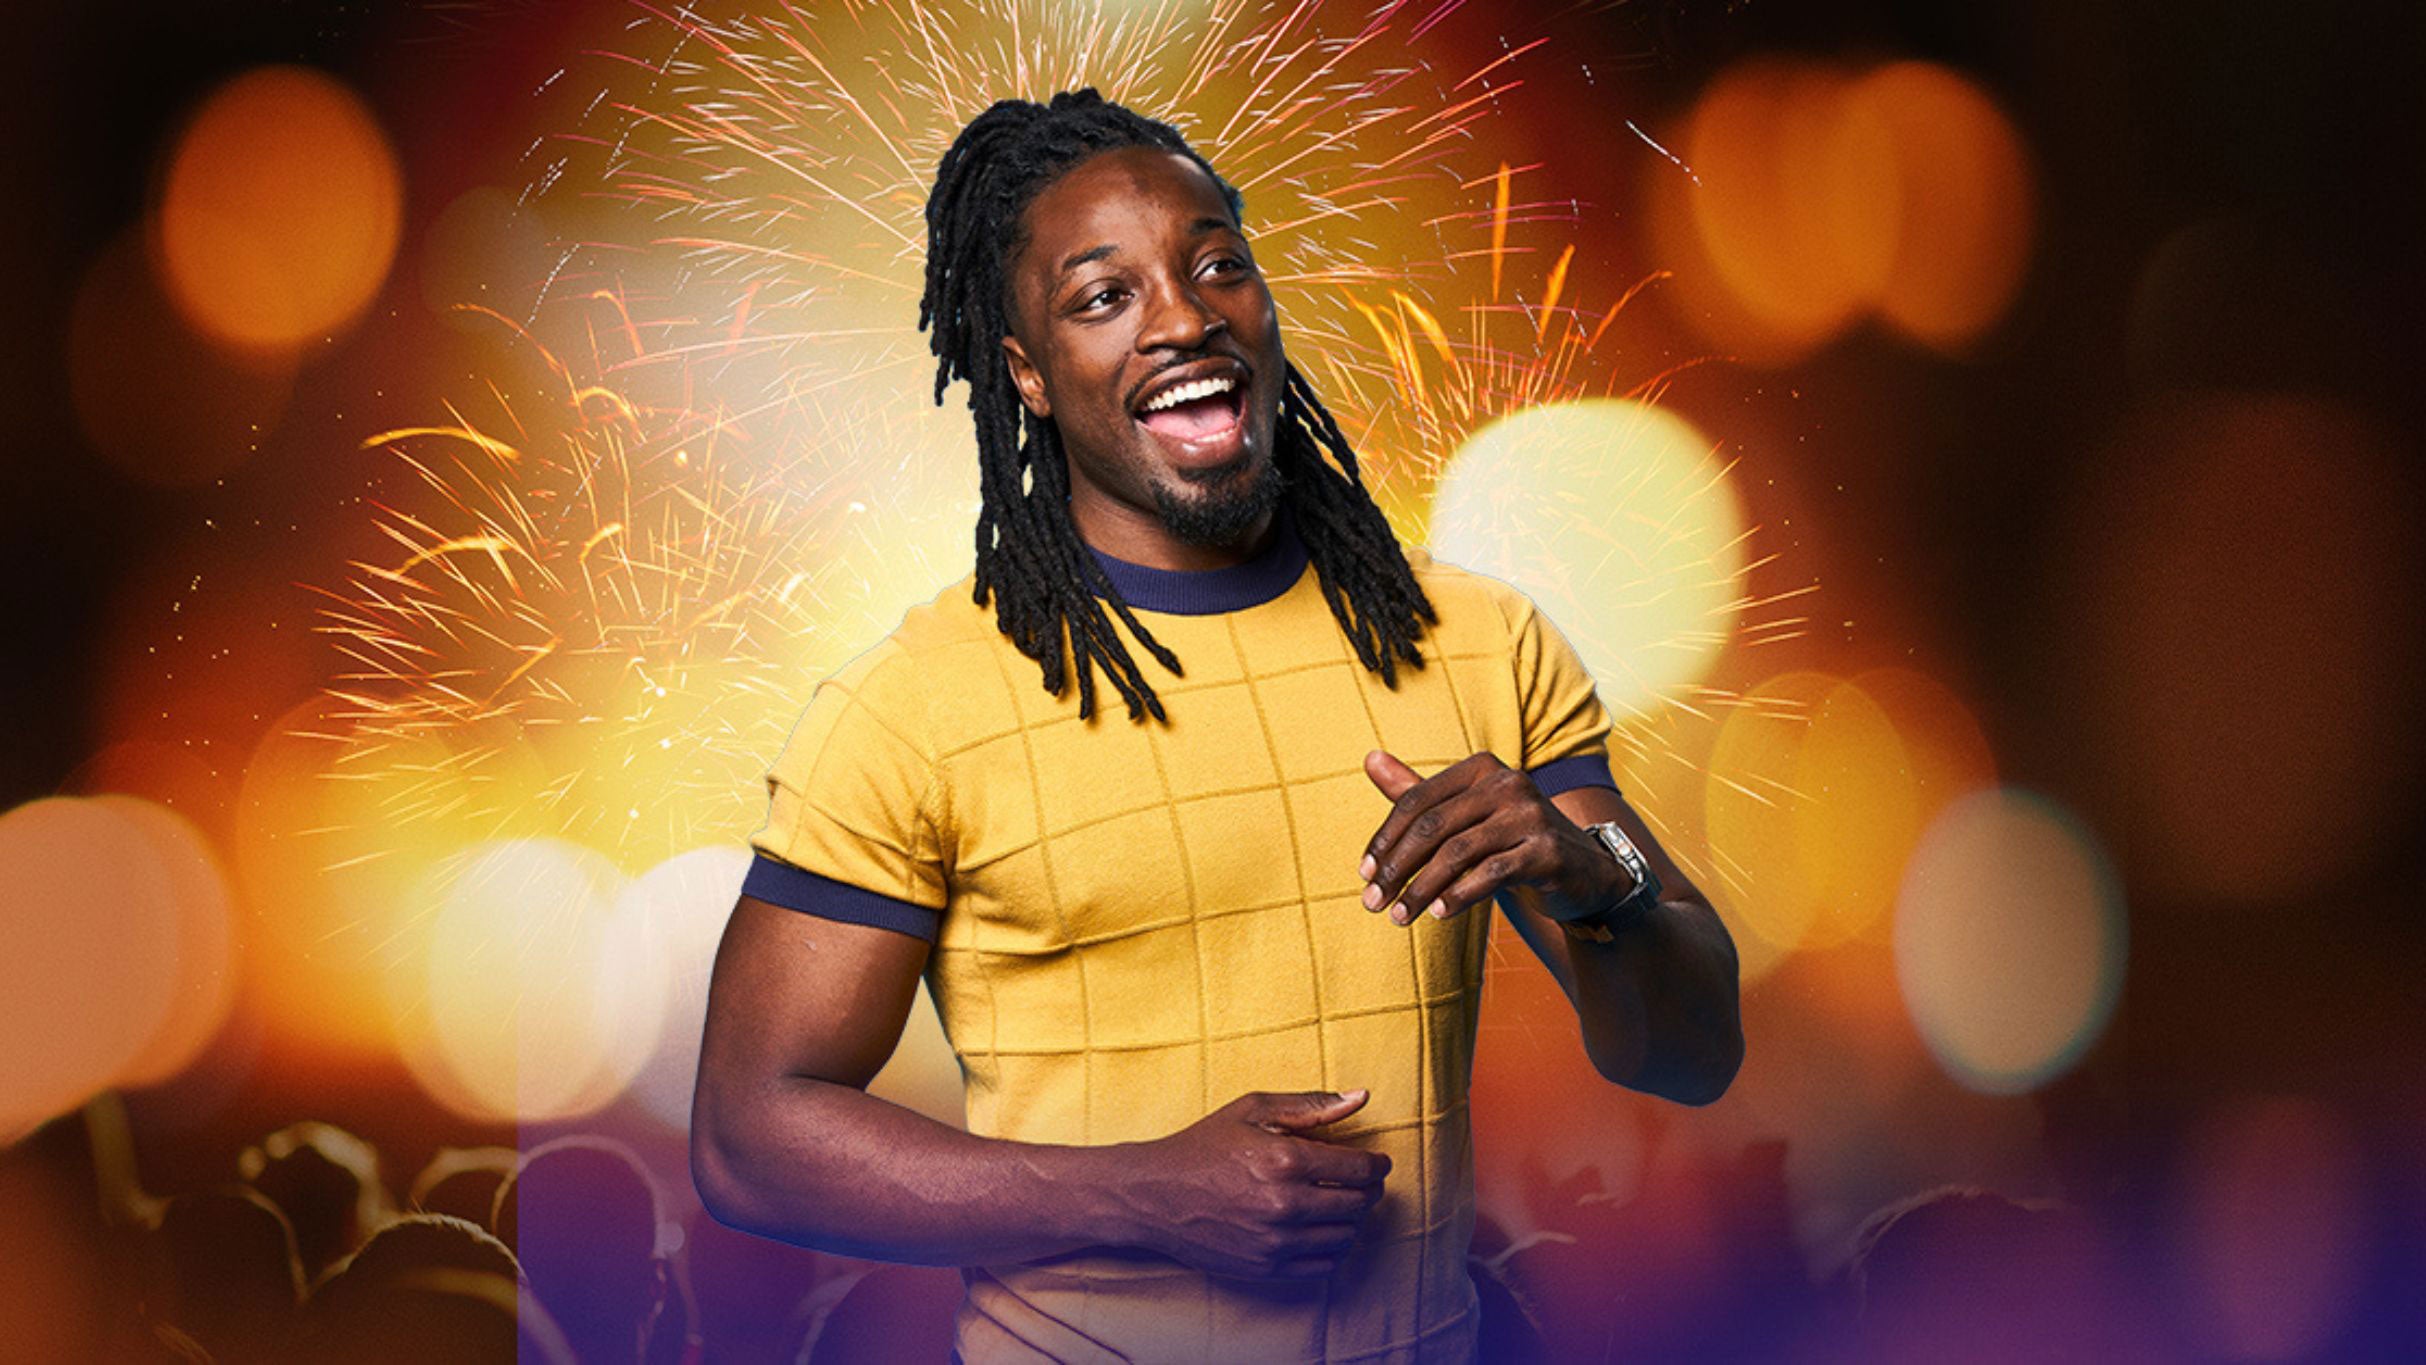 Preacher Lawson: Best Day Ever in Knoxville promo photo for Venue presale offer code